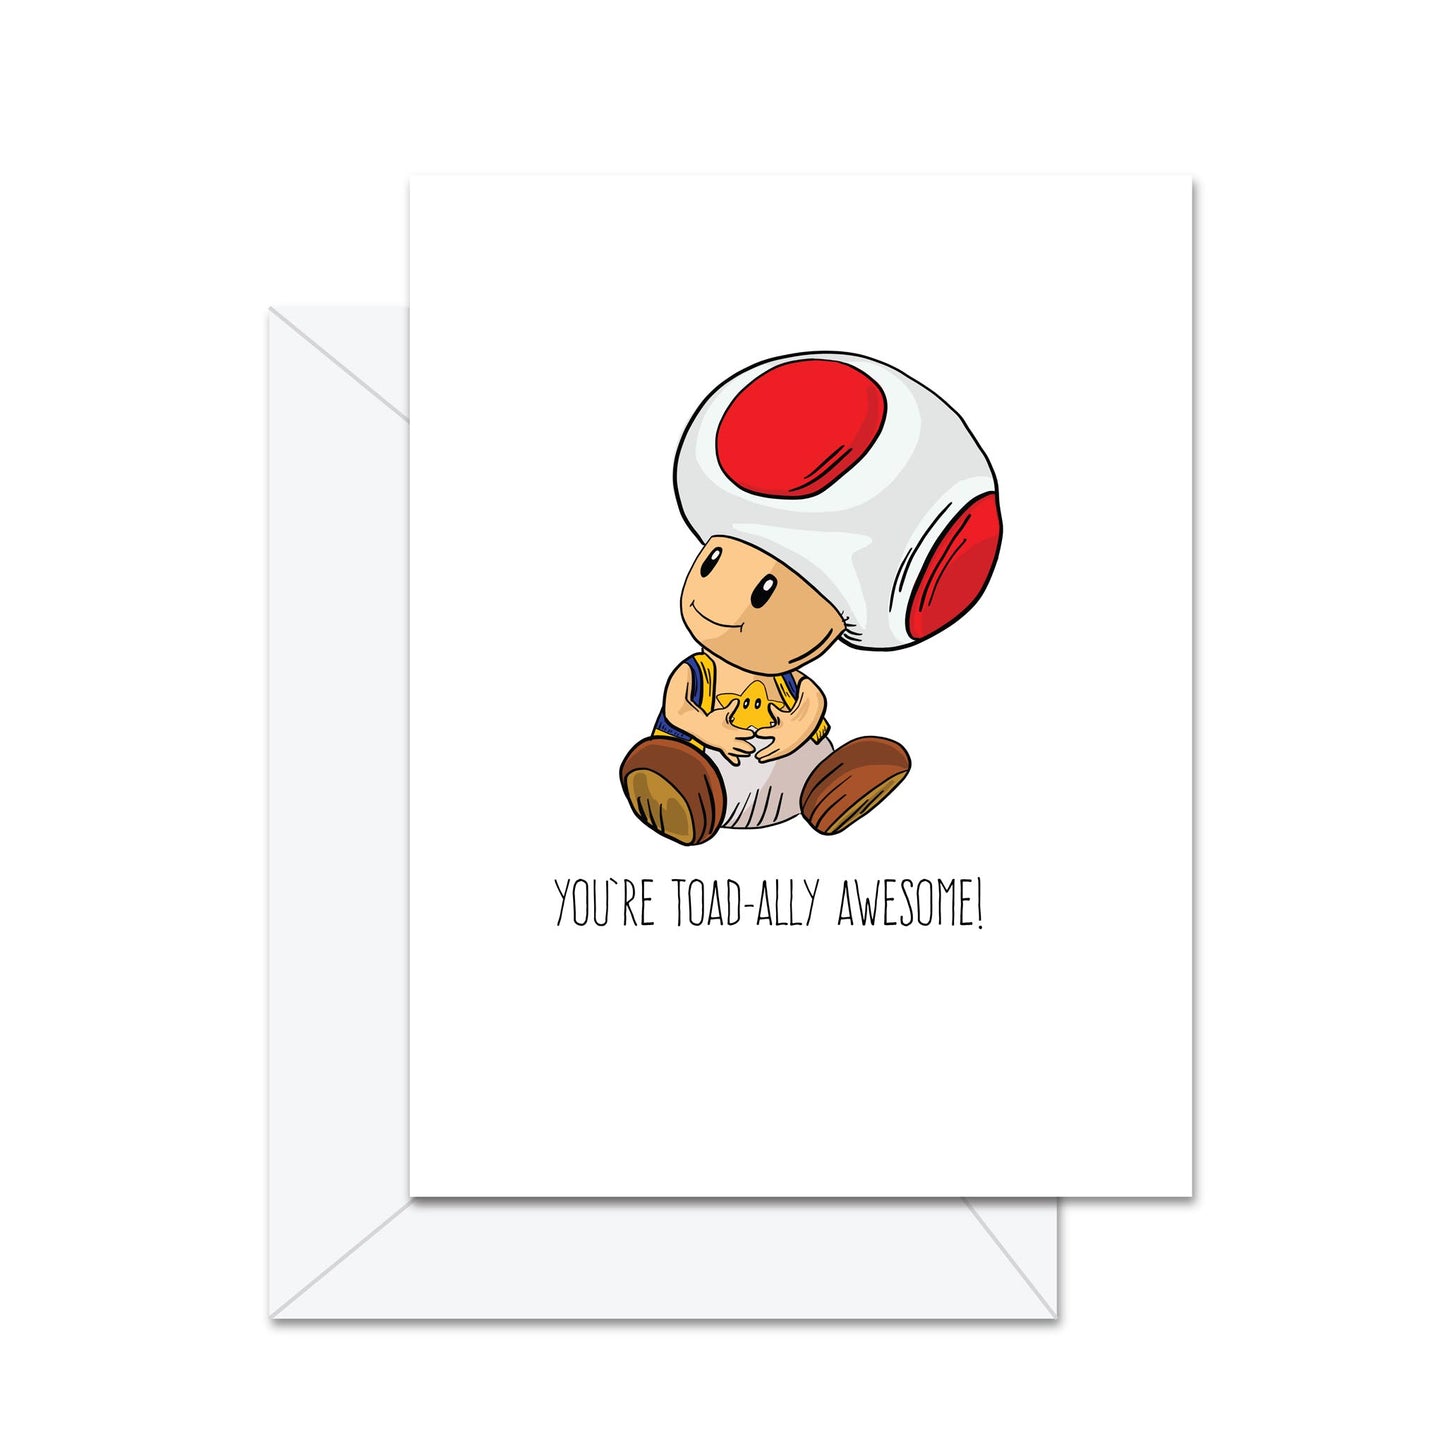 You're Toadally Awesome! - Greeting Card